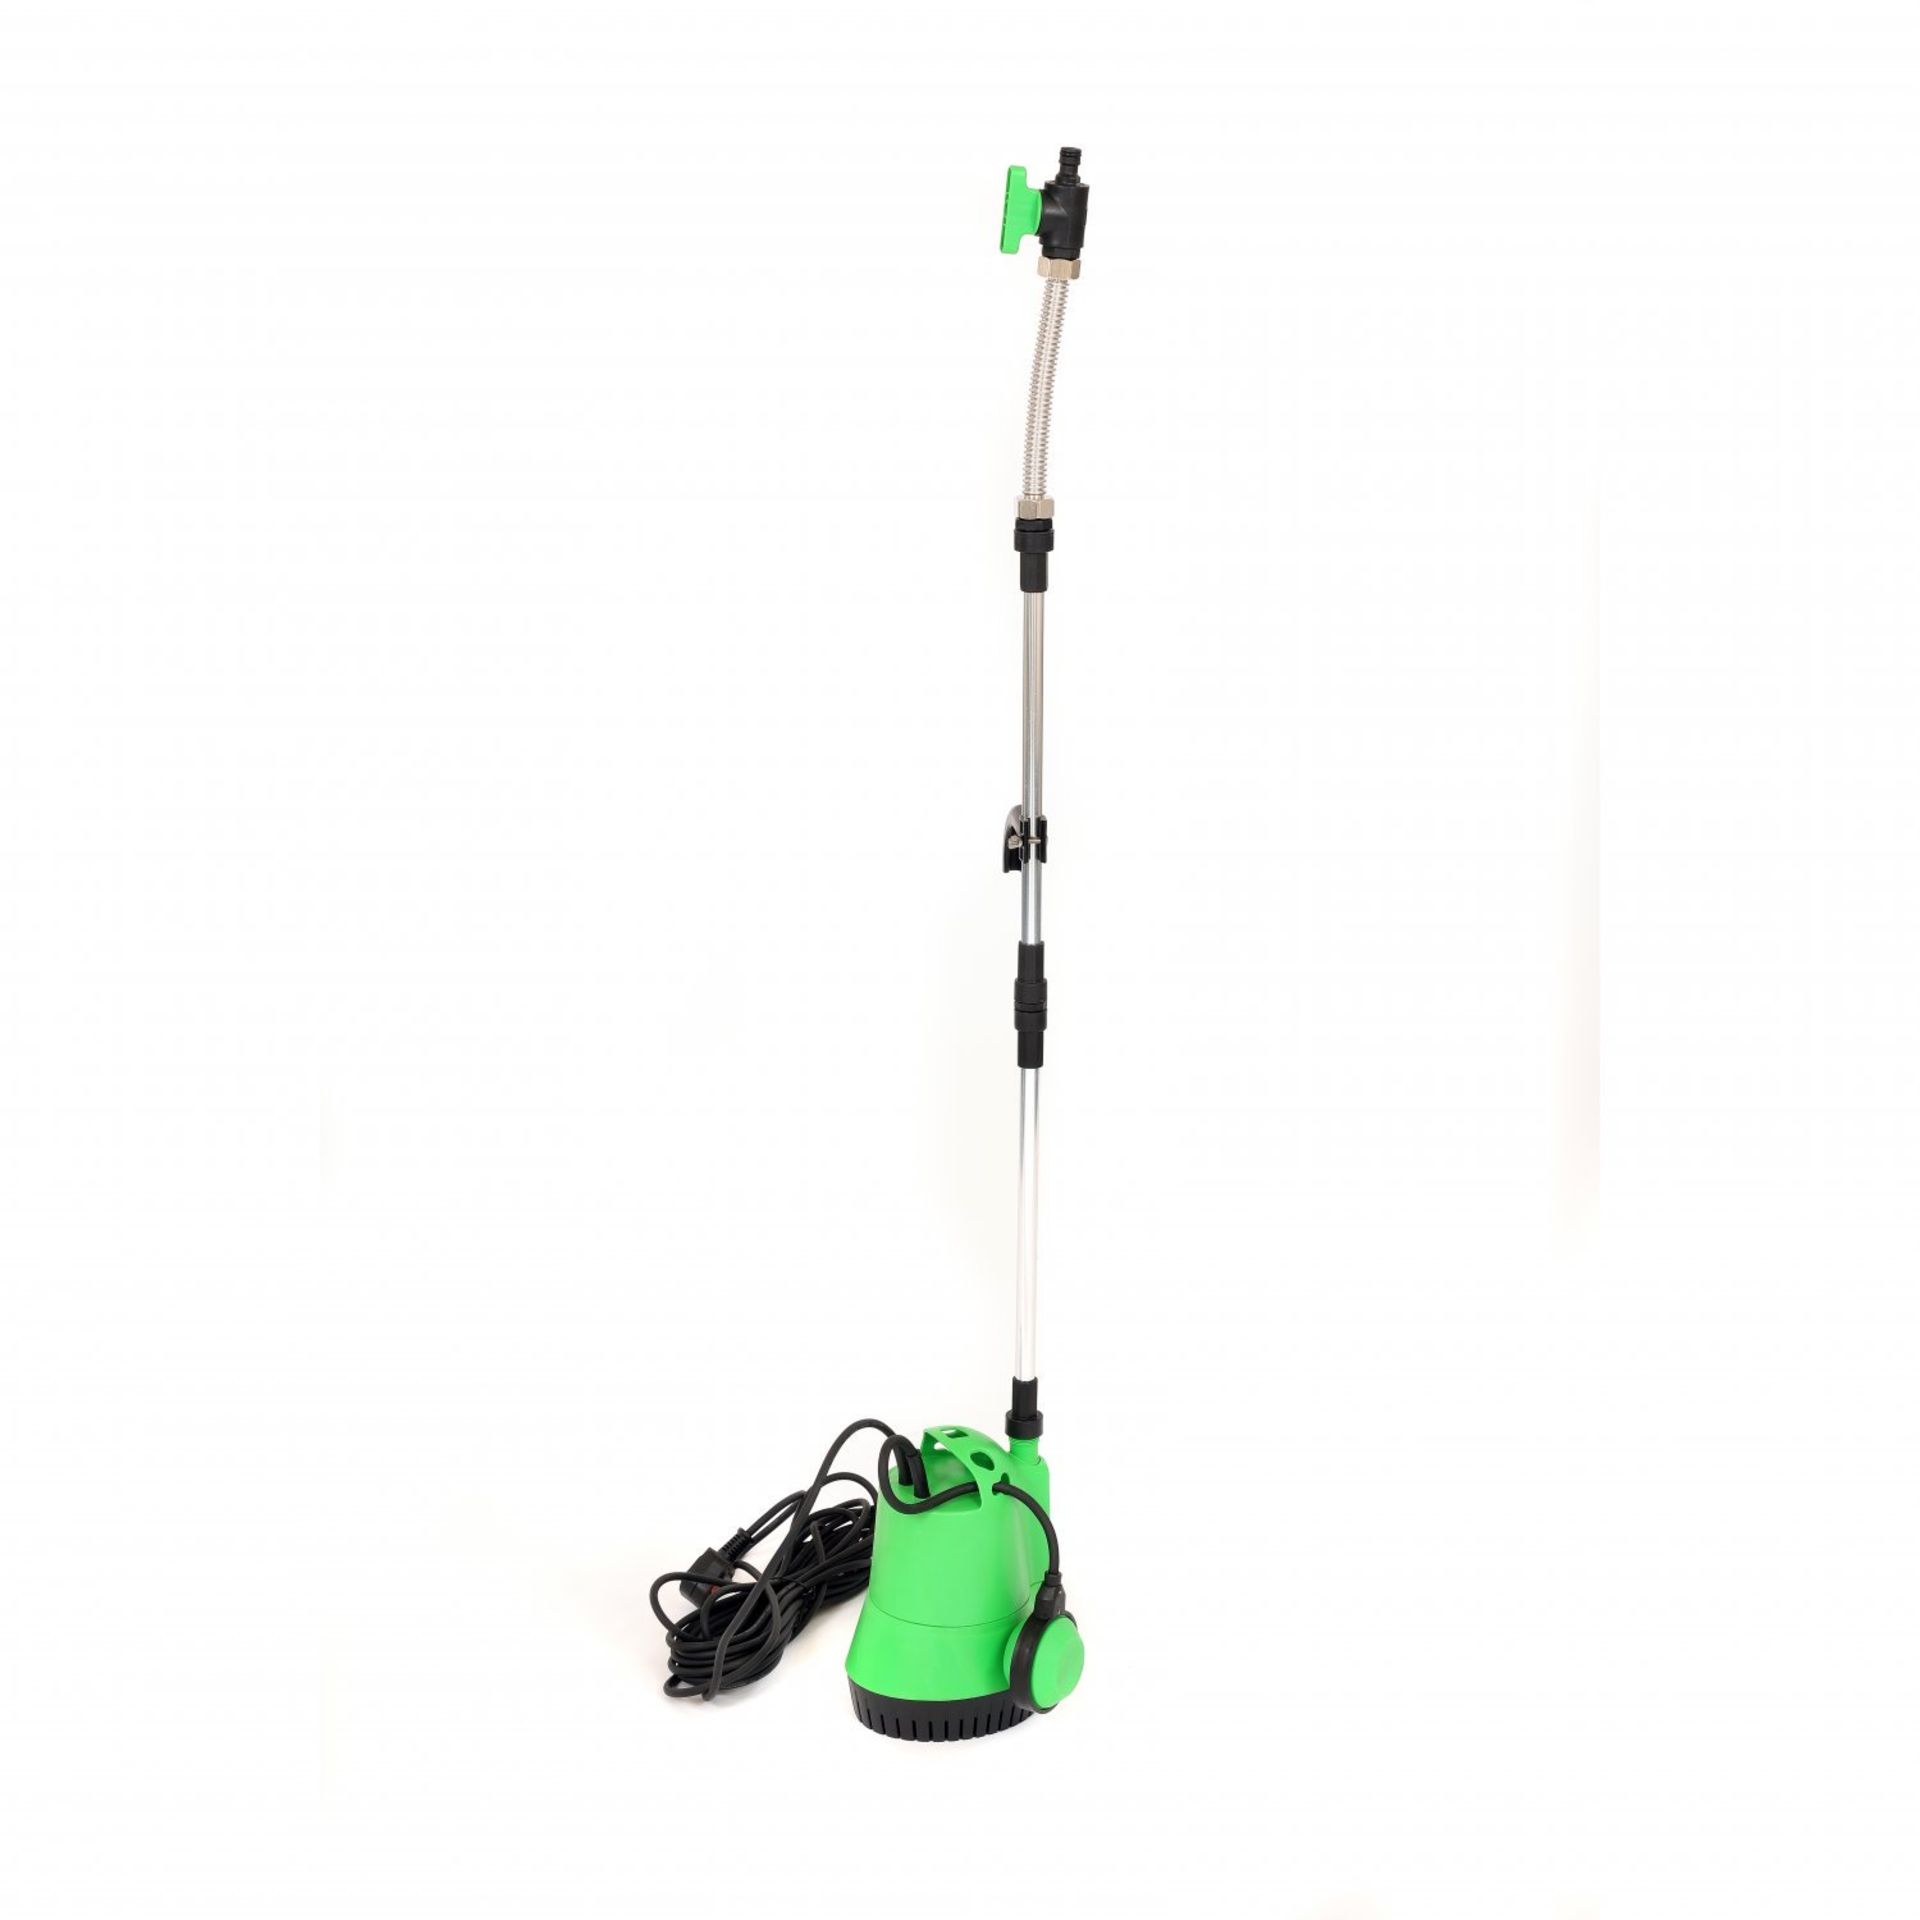 (PP35) 350W Garden Submersible Water Butt Pump 2500l/hr with 10m Cable The submersible water... - Image 2 of 2